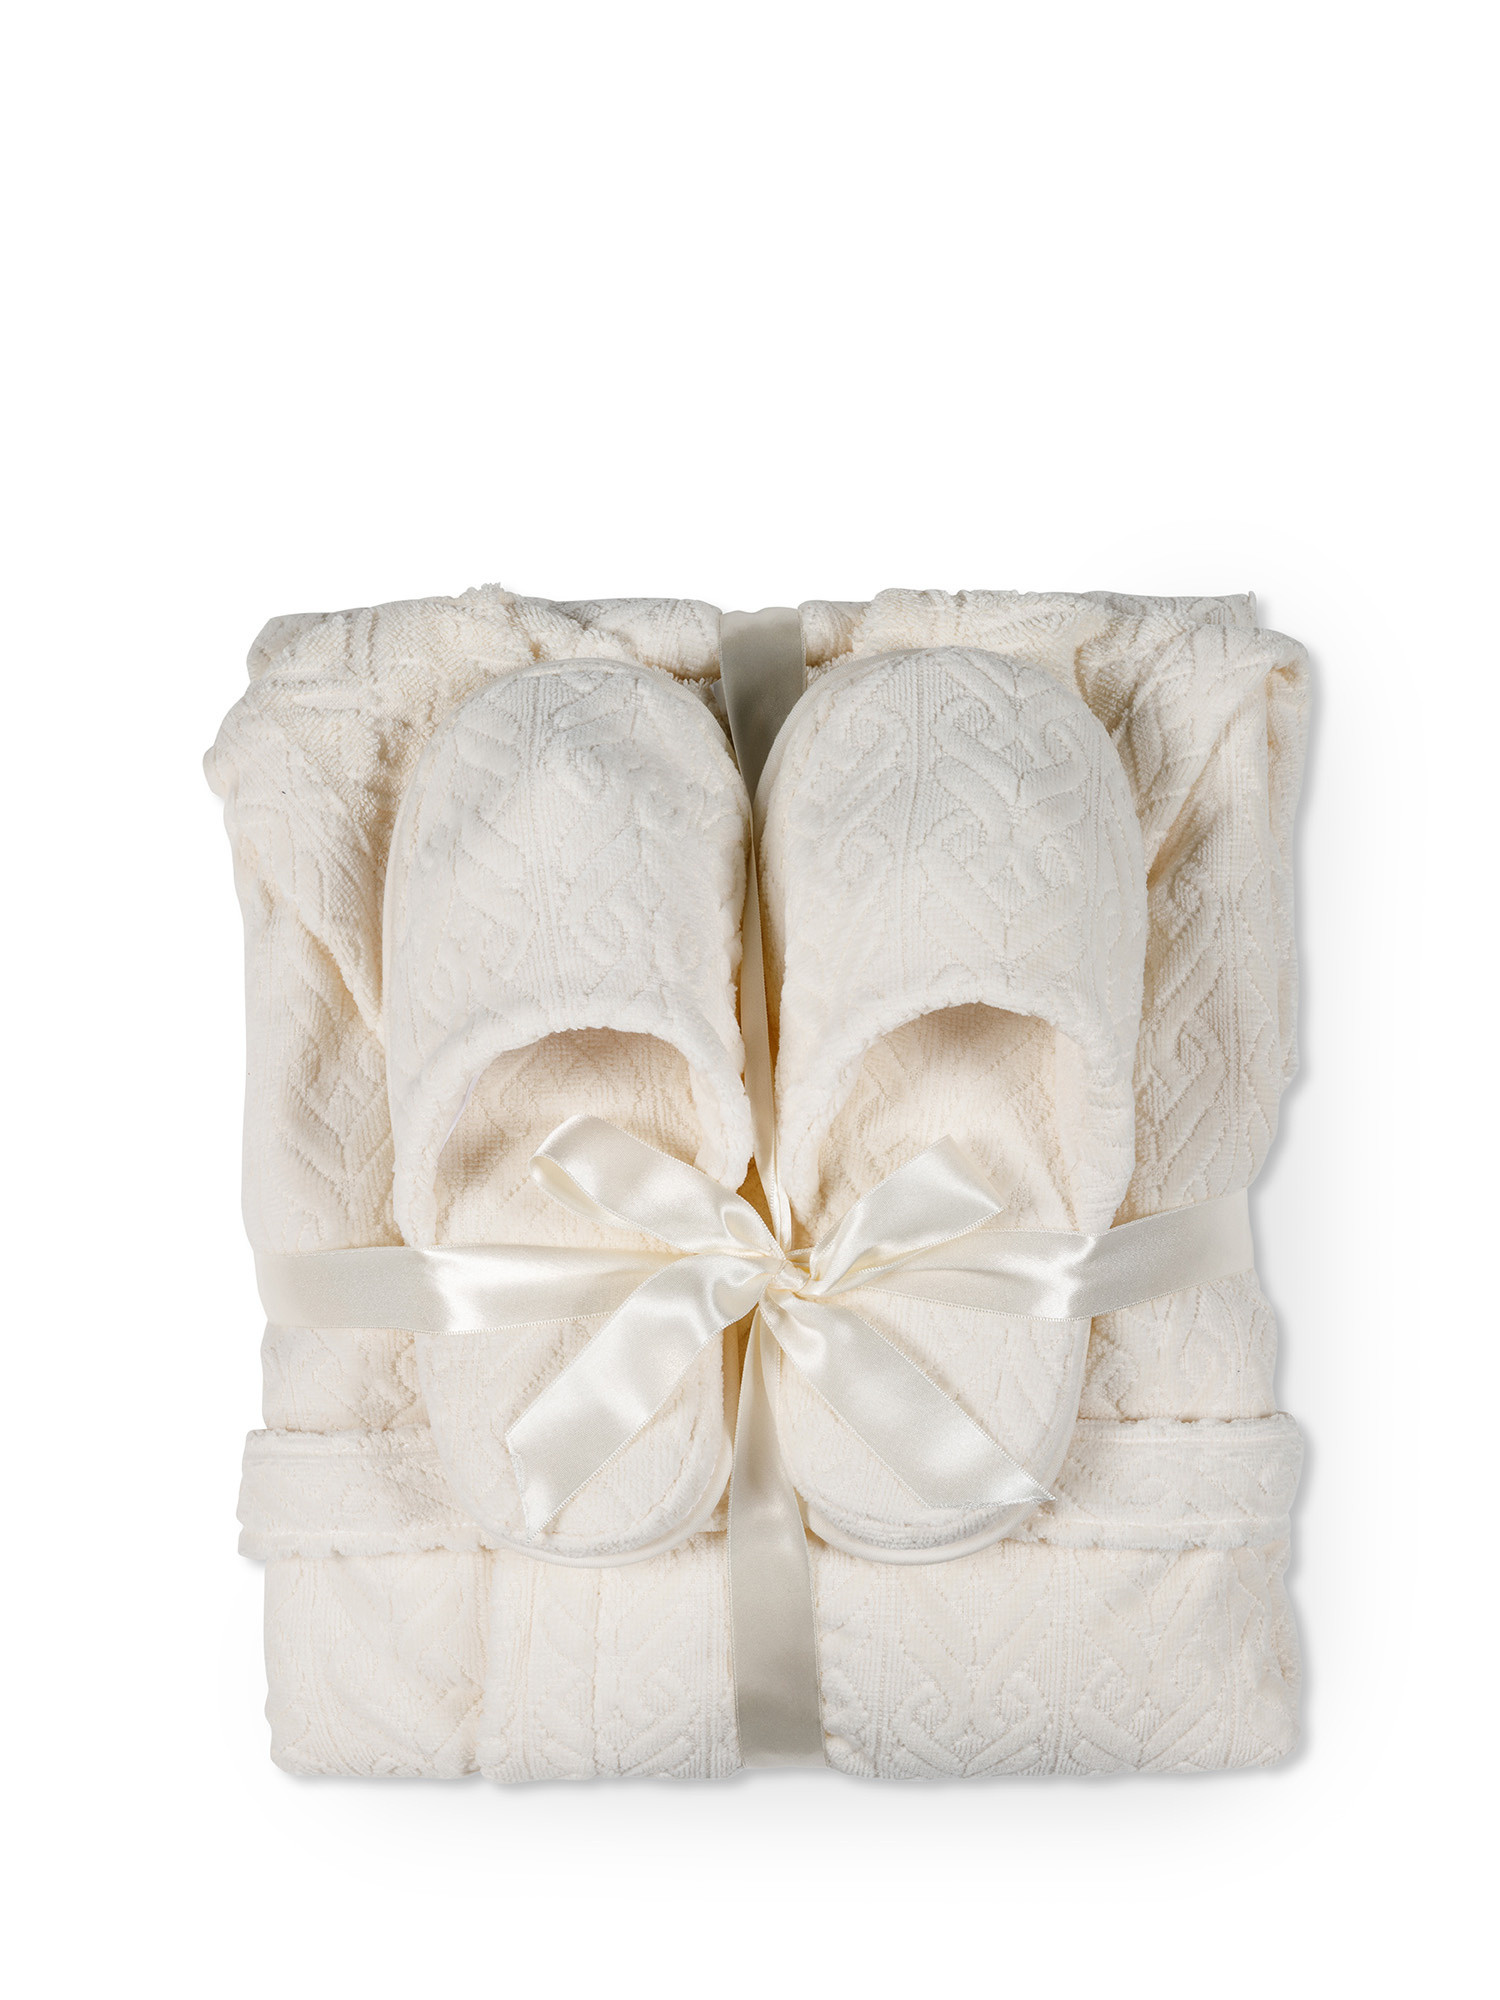 Women's bathrobe and slippers set in velor cotton terry with relief pattern, Cream, large image number 2